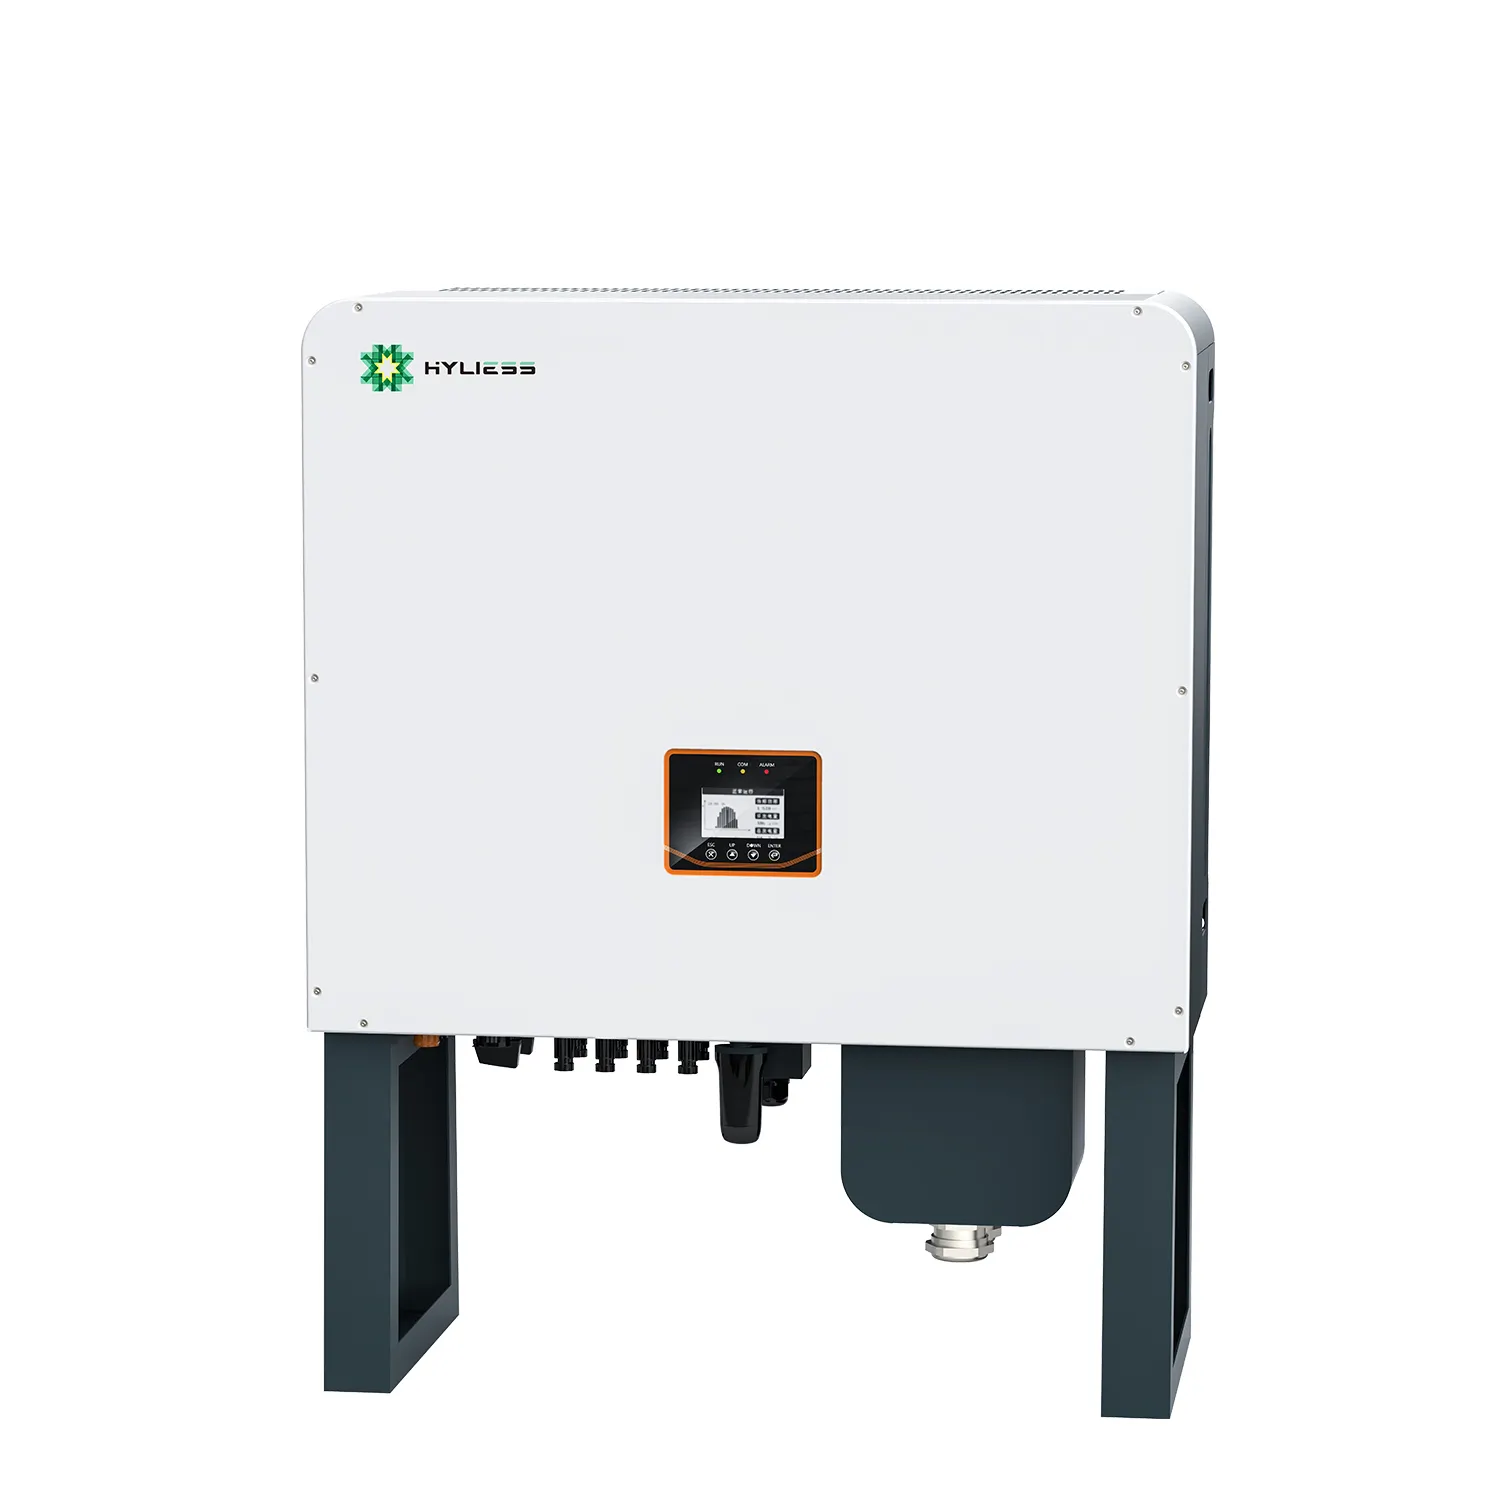 Ups backup power inverter ibrido trifase 60kW 50kW 40kW 30kW on /off grrid accumulo di energia commerciale